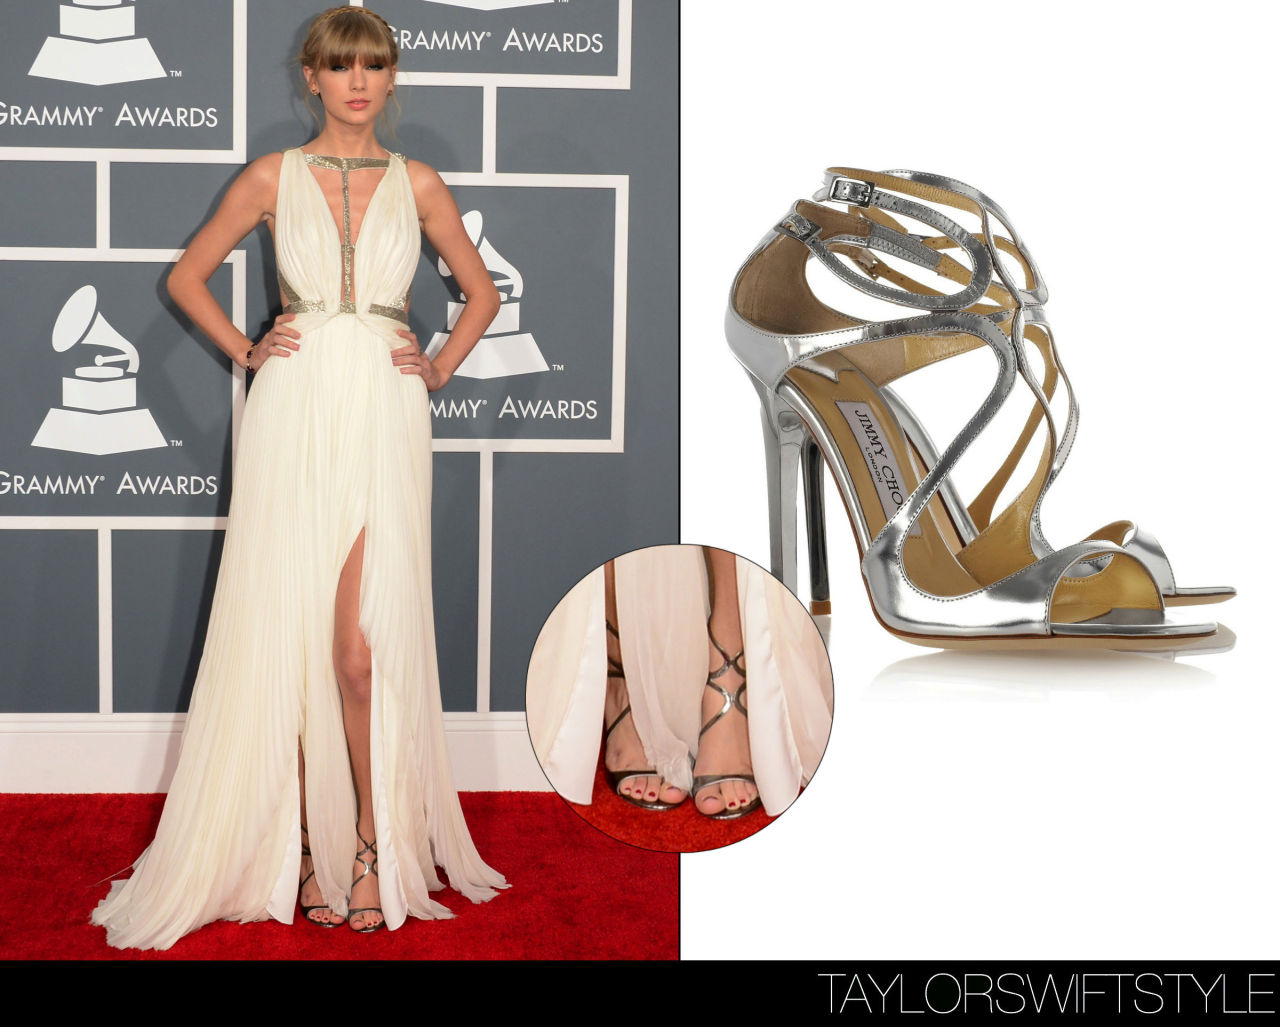 The 55th Annual GRAMMY Awards | Los Angeles, CA | February 10, 2013Jimmy Choo &#8216;Lance Sandals&#8217; - $775.00Taylor relied on her favourite labels for her red carpet look tonight at the GRAMMYs, including these tried-and-true strappy sandals by Jimmy Choo.She completed her look with earrings and a bracelet by her favourite jeweller Lorraine Schwartz in addition to a geometric ring by Ofira who Taylor has recently worn several pieces by.Worn with: J Mendel gown